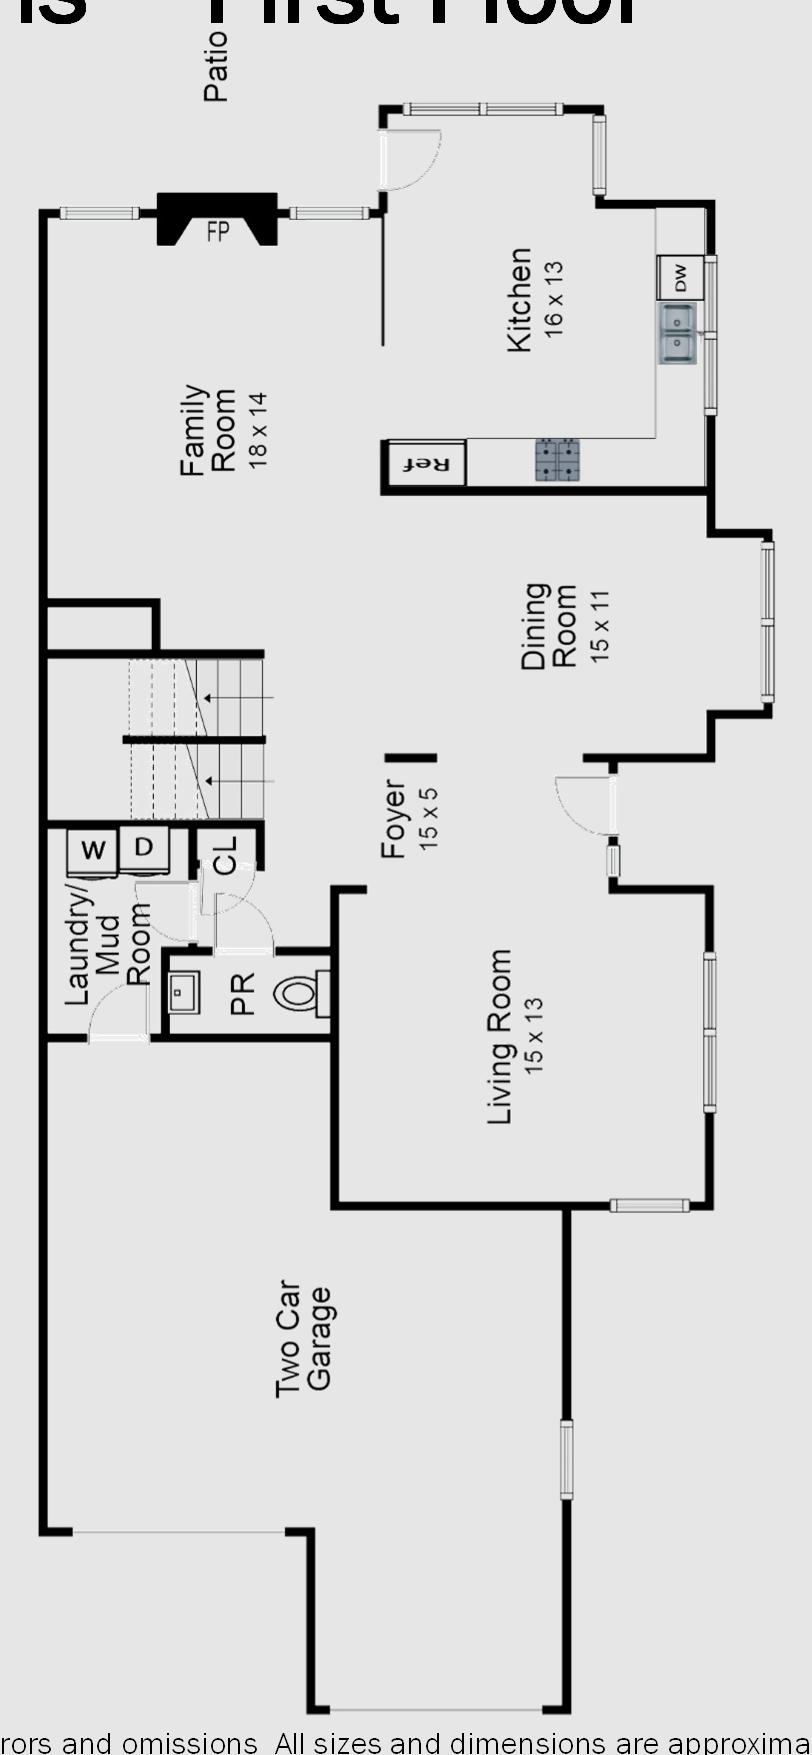 Floor Plans First Floor Actual may vary.